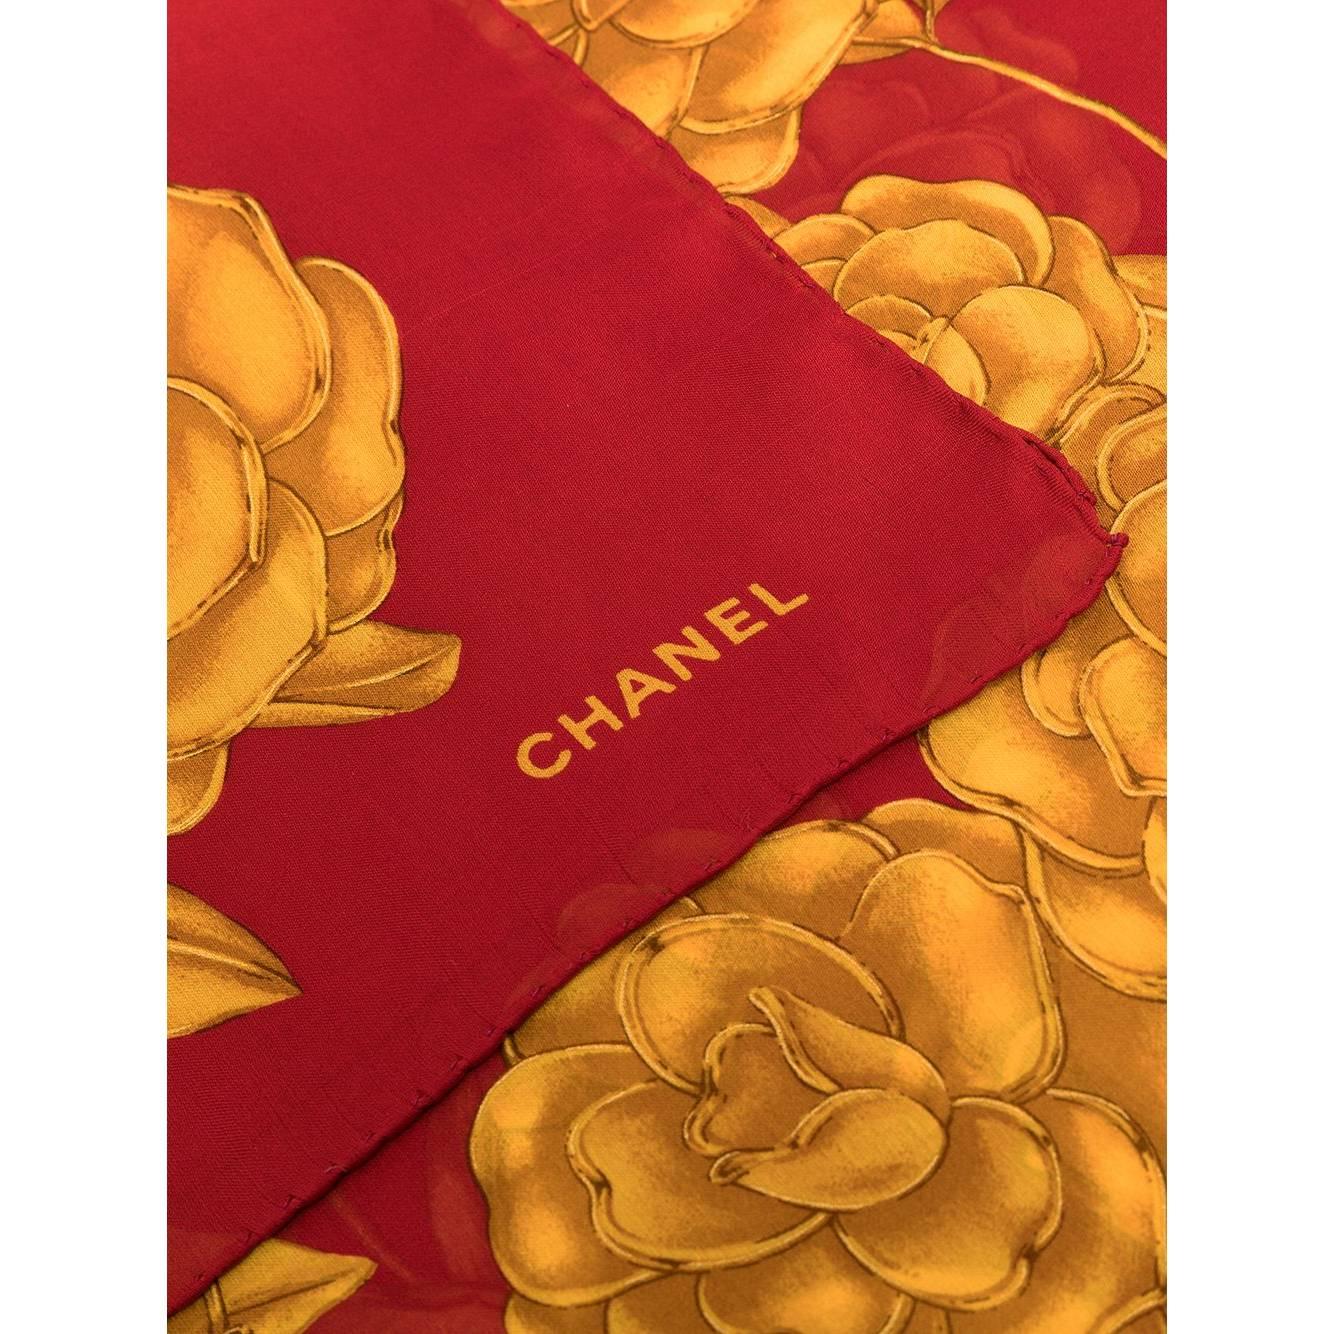 A.N.G.E.L.O. Vintage - ITALY
Chanel red silk scarf with gold printed camellias. Model with finished edges and printed logo.

Years: 90s

Made in Italy

Measurements: 100 x 97 cm